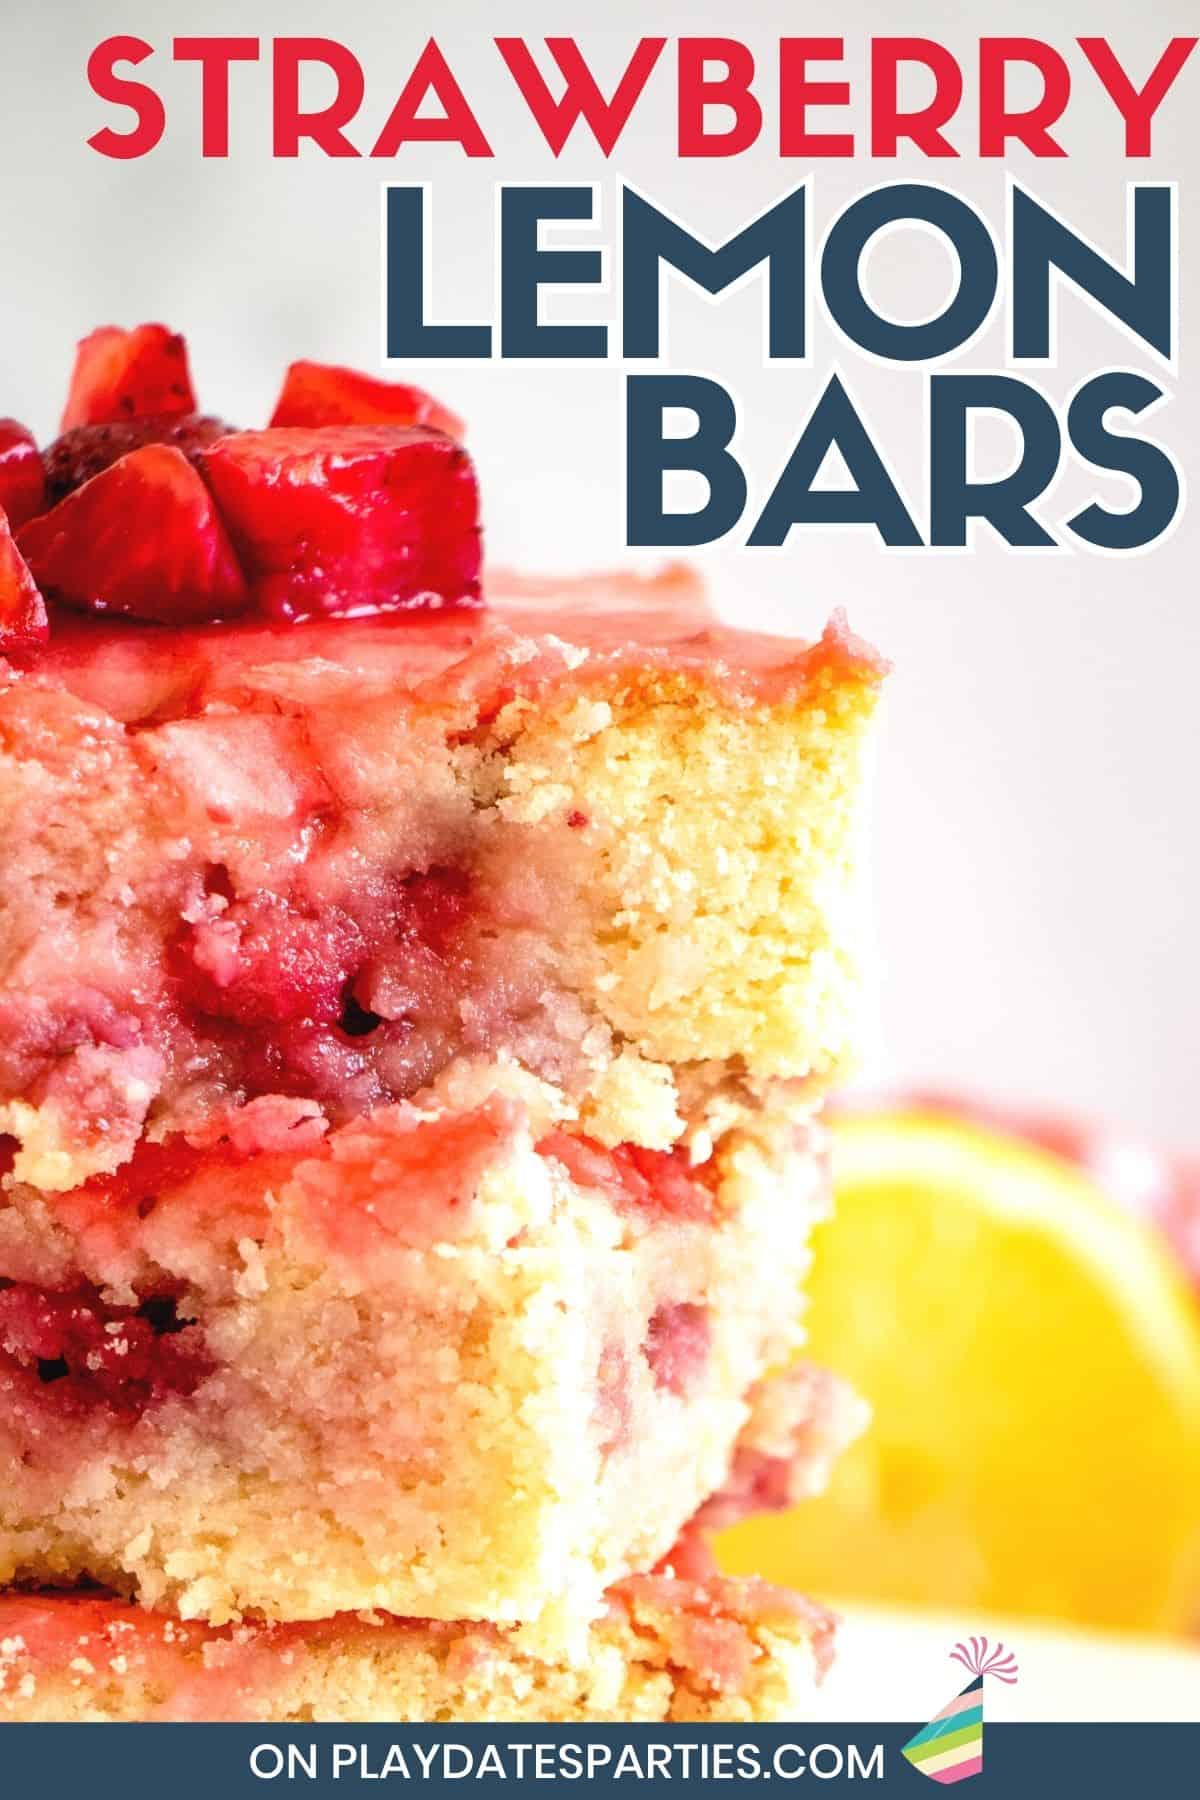 Close up view of tender dessert bars with text overlay strawberry lemon bars.